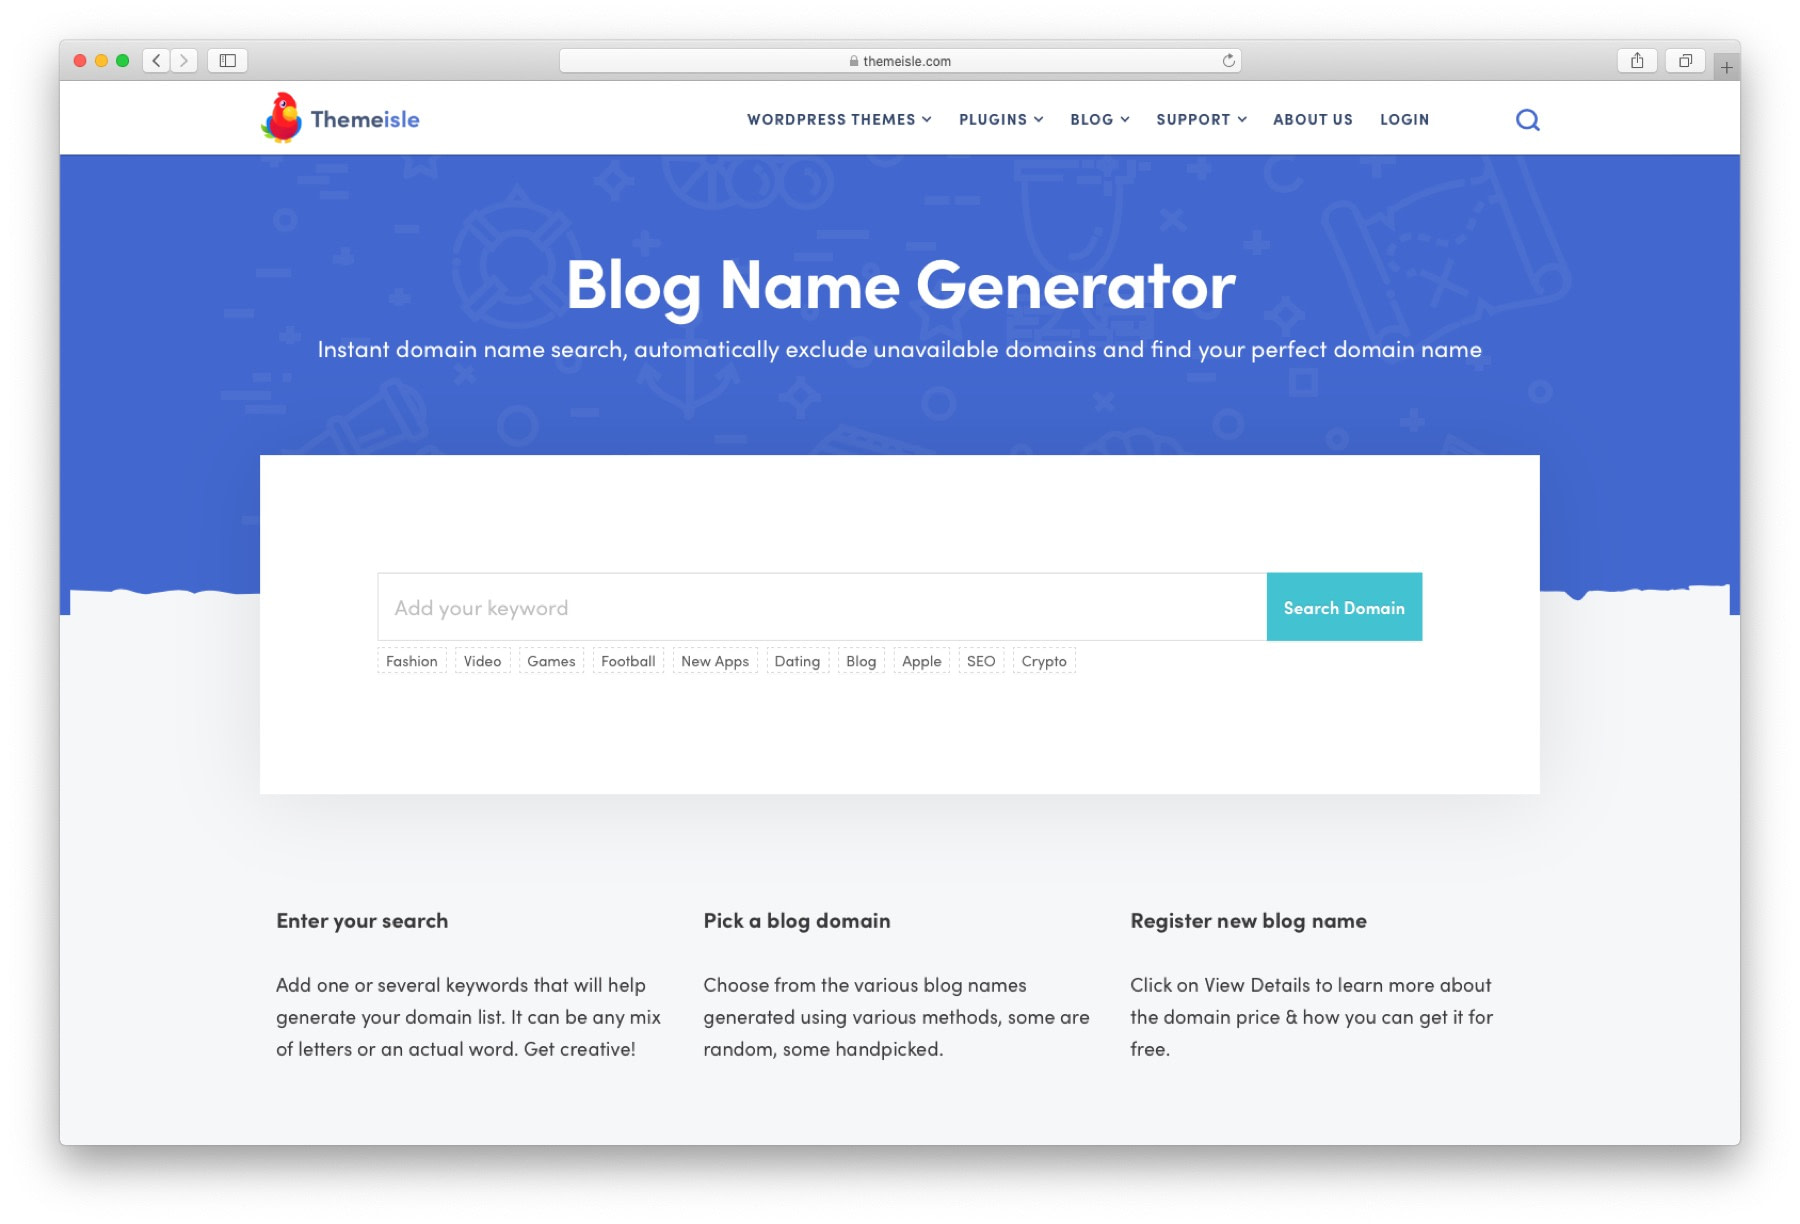 I doubt it bison mini Best Blog Name Generator List: 10+ Tools to Find Blog Name Ideas